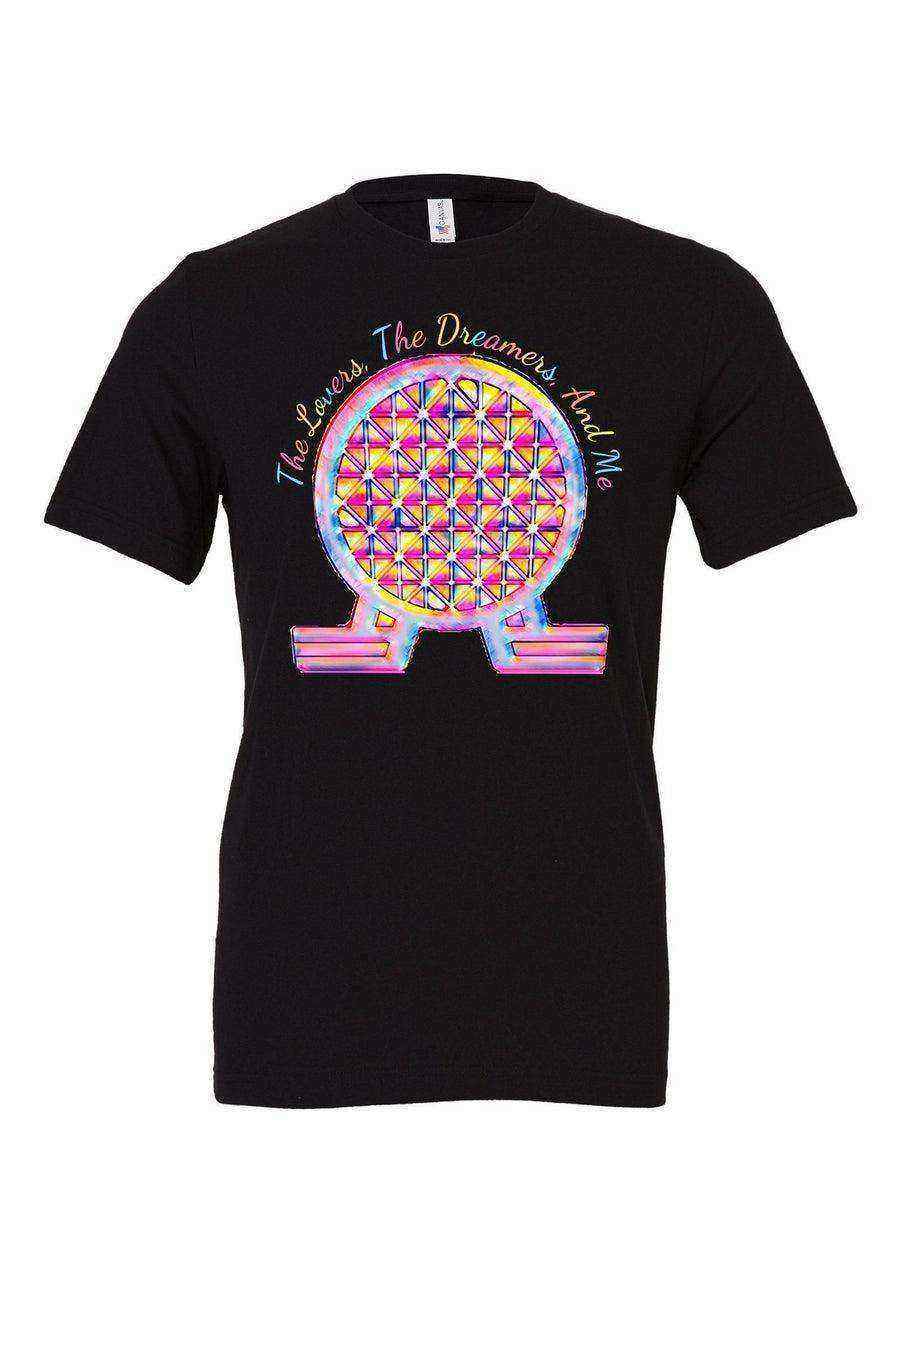 Lovers Dreamers & Me Epcot Shirt - Dylan's Tees